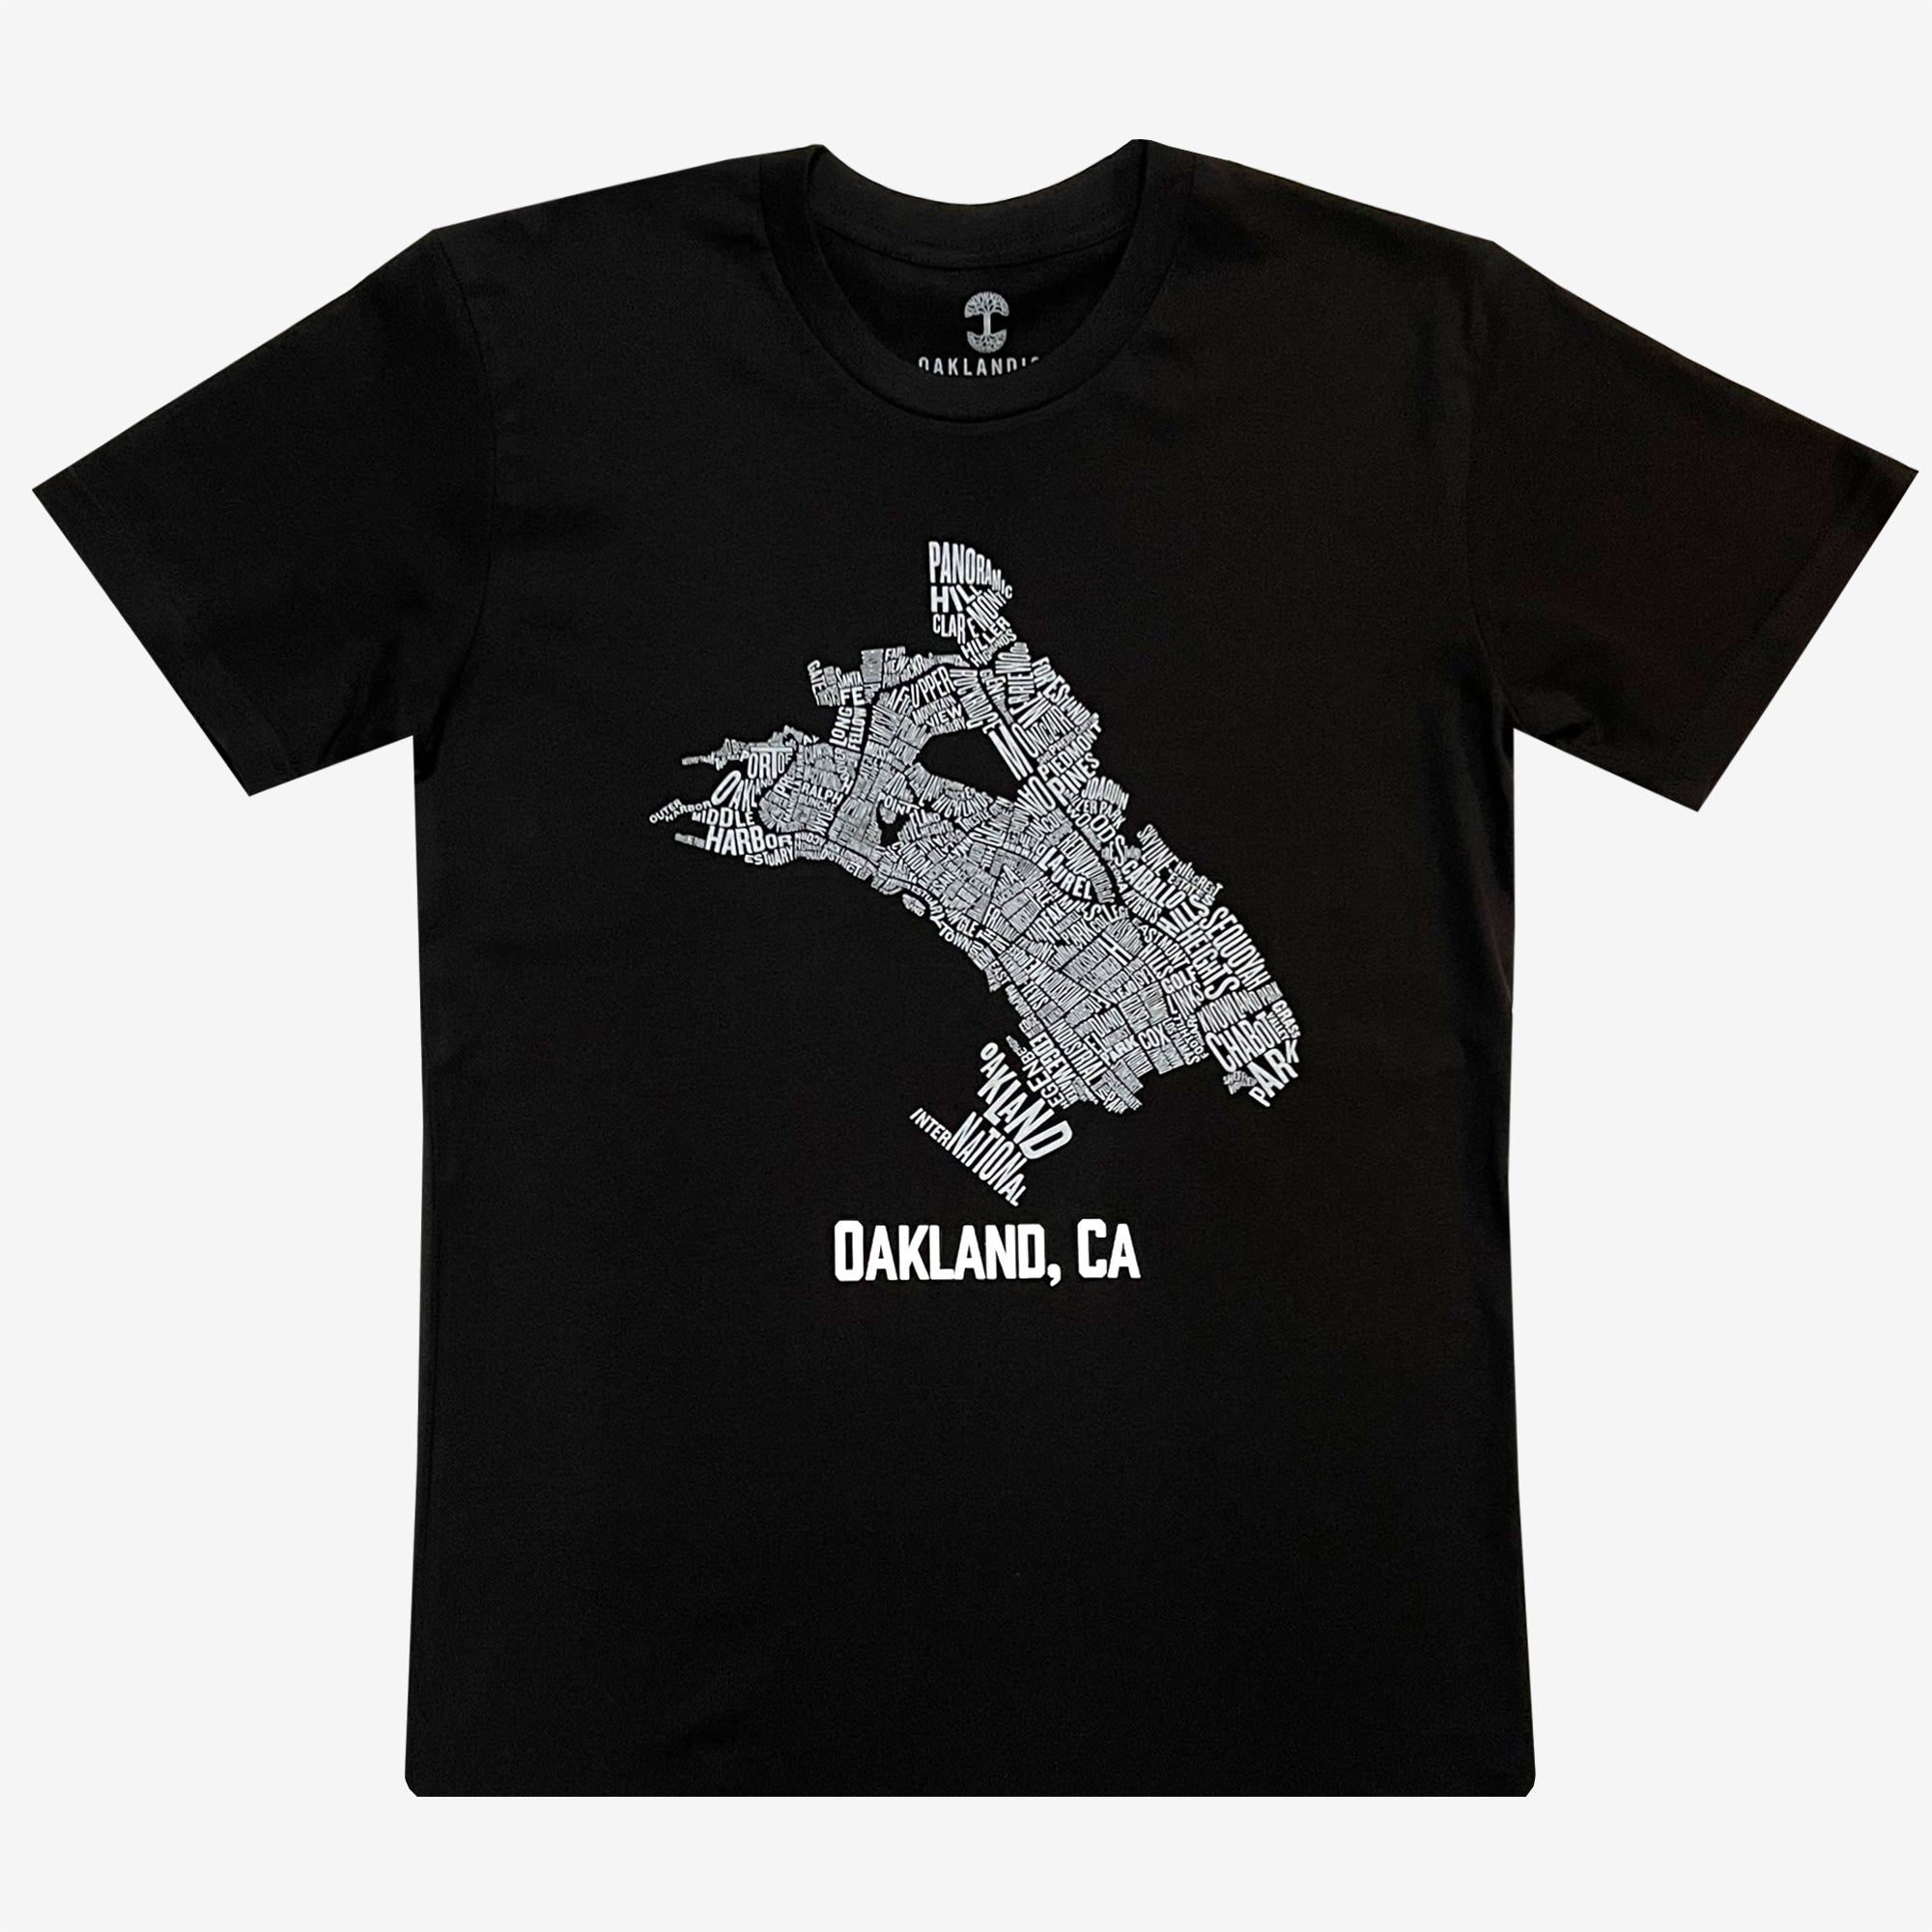 Black t-shirt with a graphic of Oakland with a neighborhood map & Oakland CA wordmark.. 